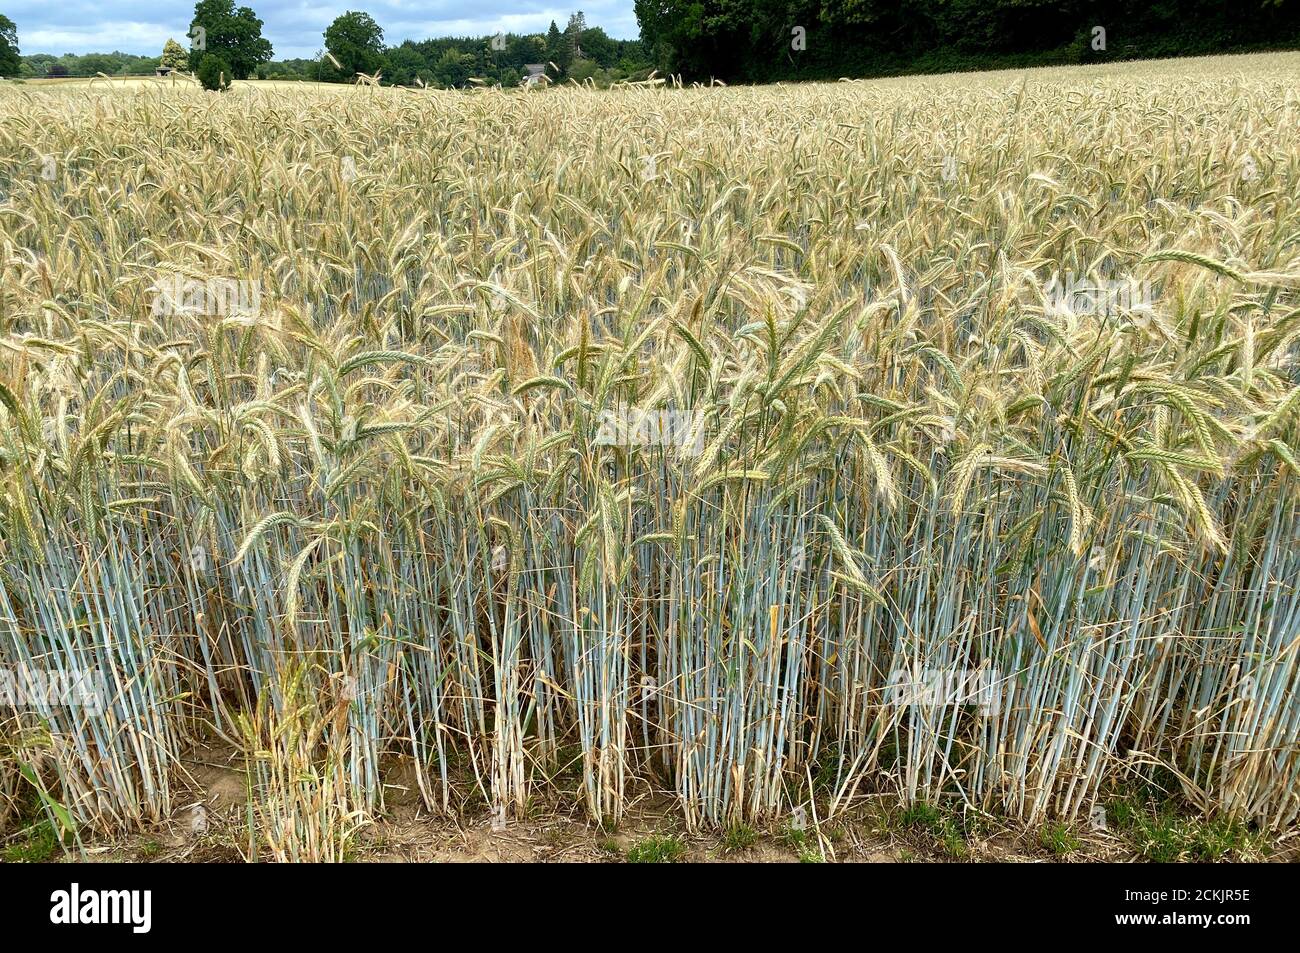 A wheat field on farmland near Hambledon, Surrey, England. The Summer food crop is a week away from harvesting in the Summer sunshine. The grain is gr Stock Photo